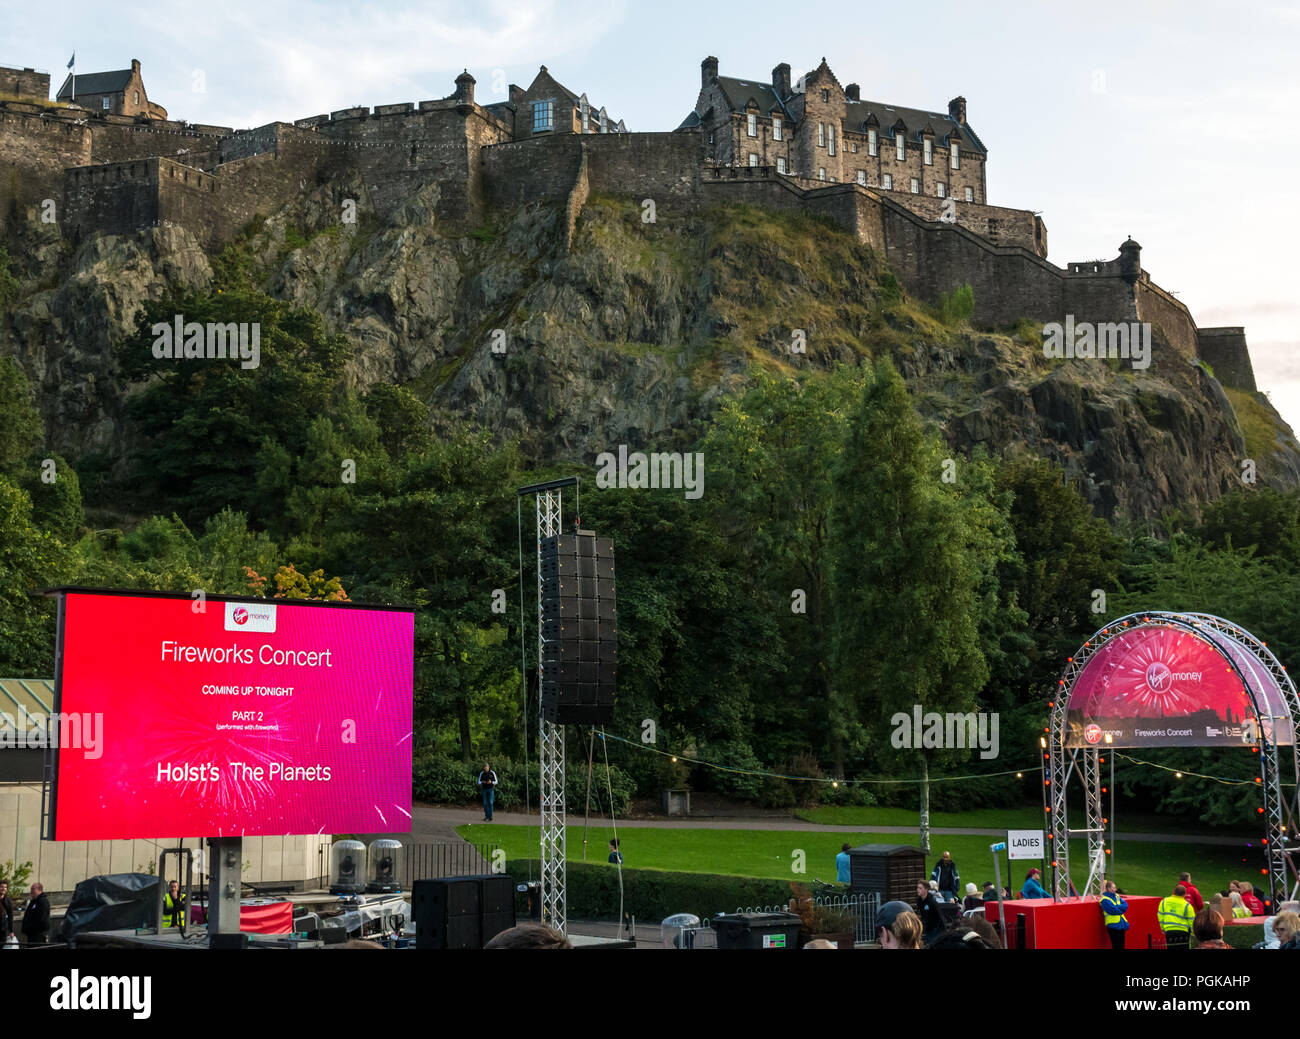 Princes Street Gardens, Edinburgh, Scotland, UK, 27th August 2018. Edinburgh International Festival finale Virgin Money sponsored fireworks. The Scottish Chamber Orchestra play selections from Holst's Suite The Planets choreographed with fireworks from Edinburgh Castle to end the Summer festival. The audience begins to arrive at the Ross bandstand Stock Photo